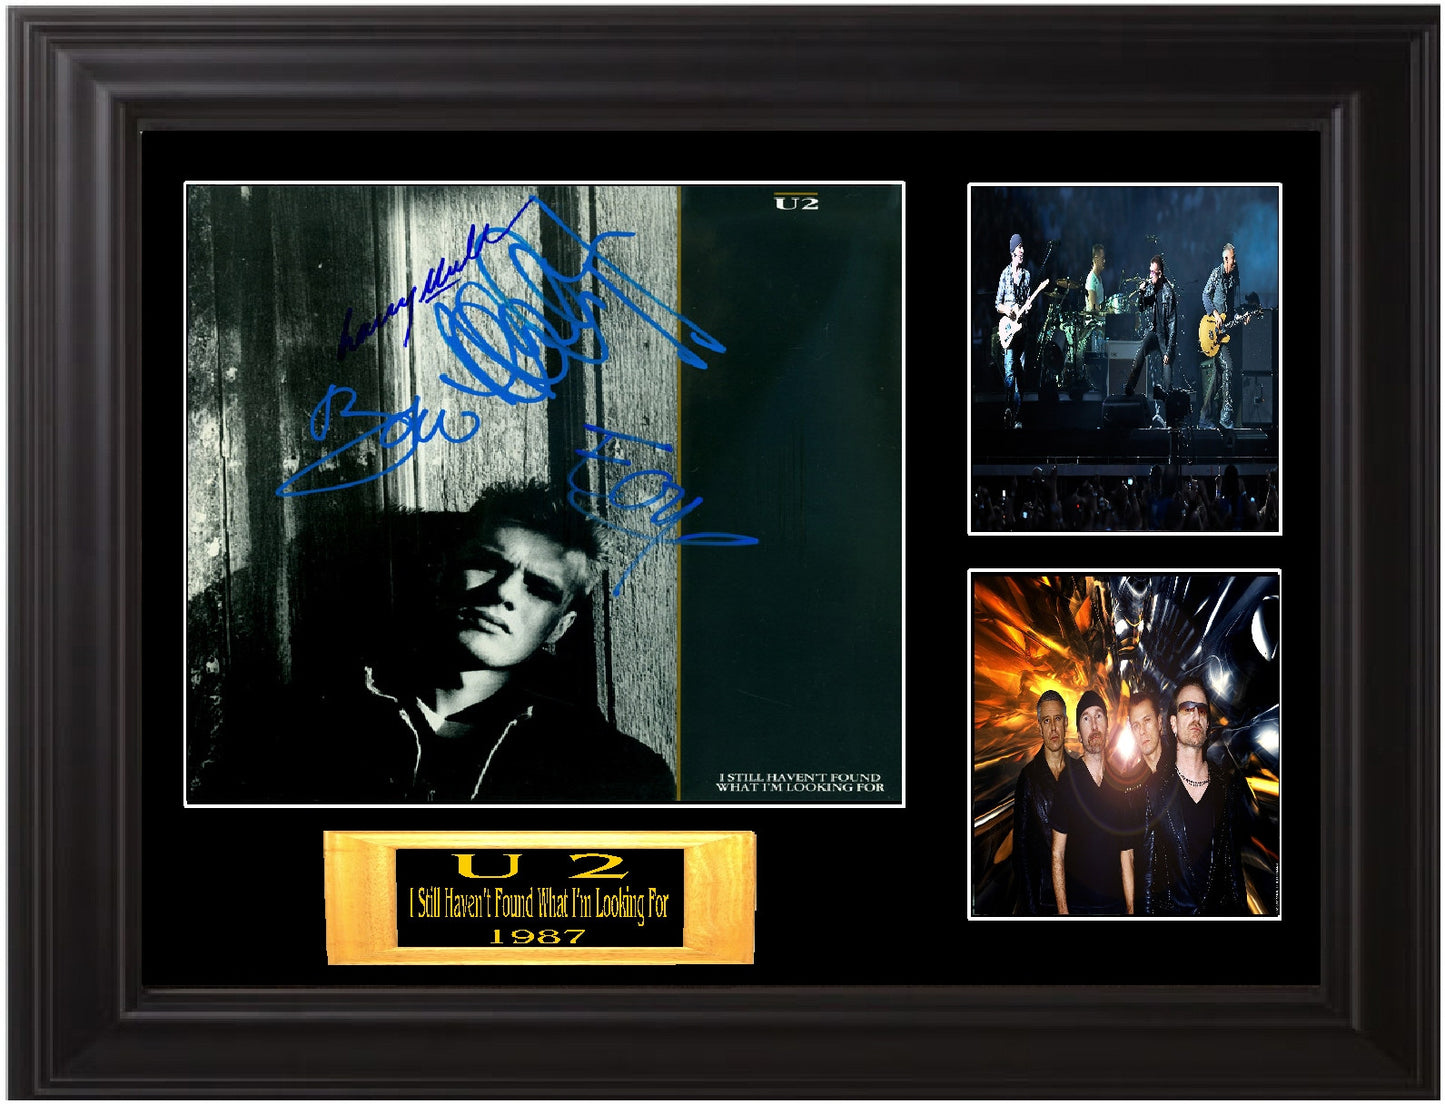 U 2 Autographed Lp "I Still Haven't Found What I'm Looking For" - Zion Graphic Collectibles